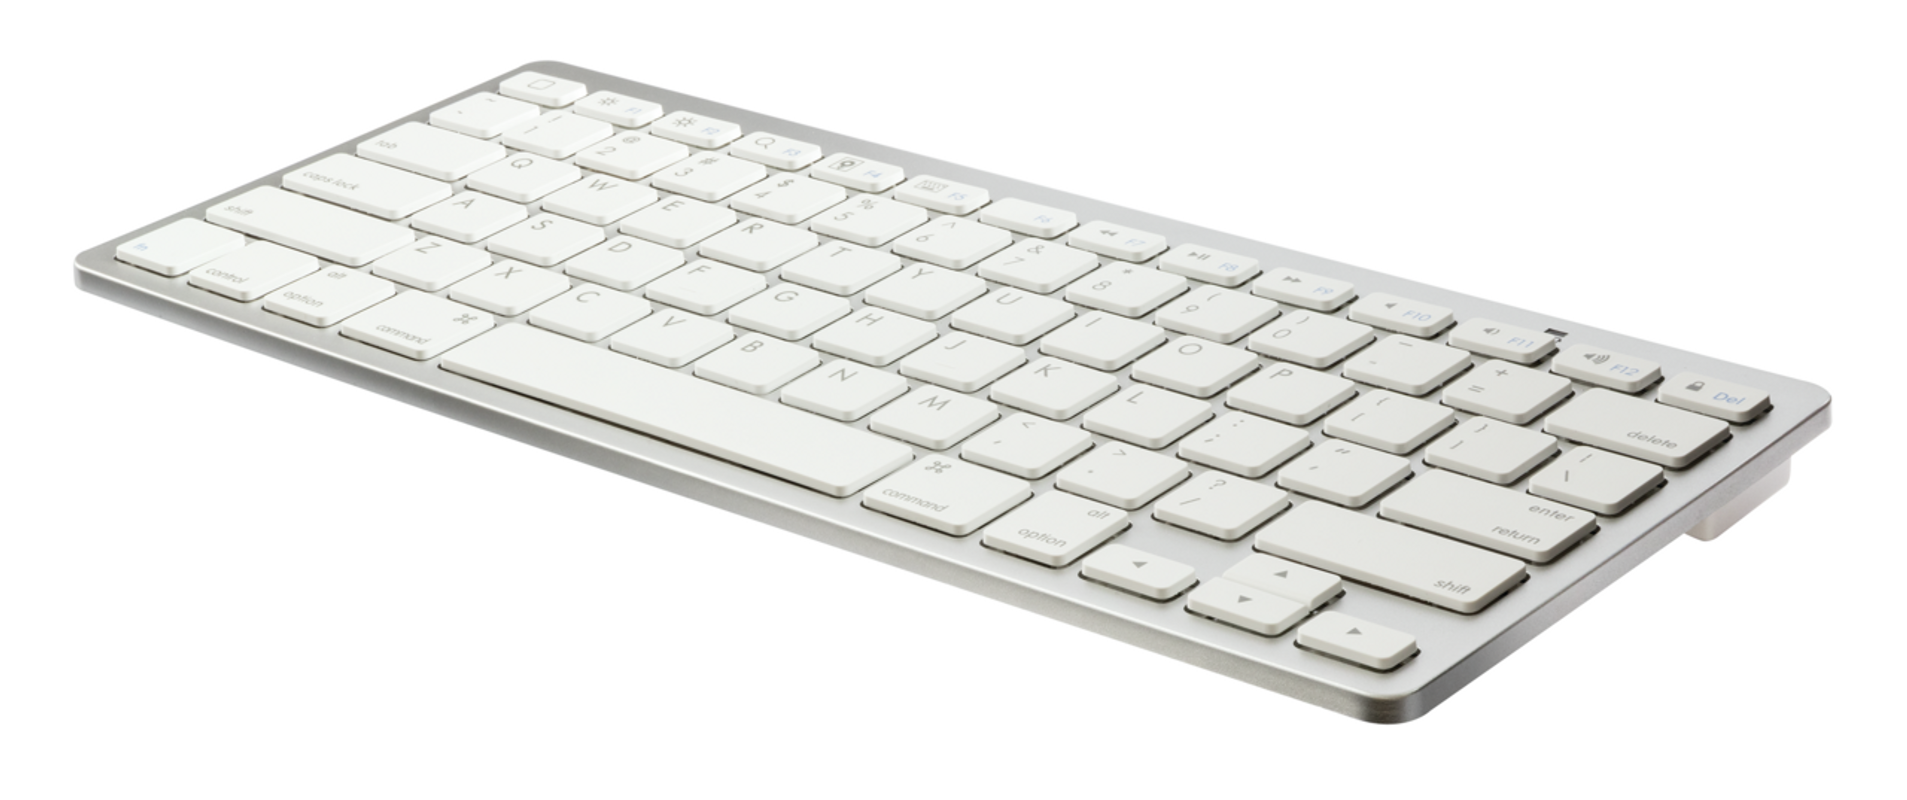 Wireless Bluetooth Keyboard for PC, laptop, tablet & phone-Visual